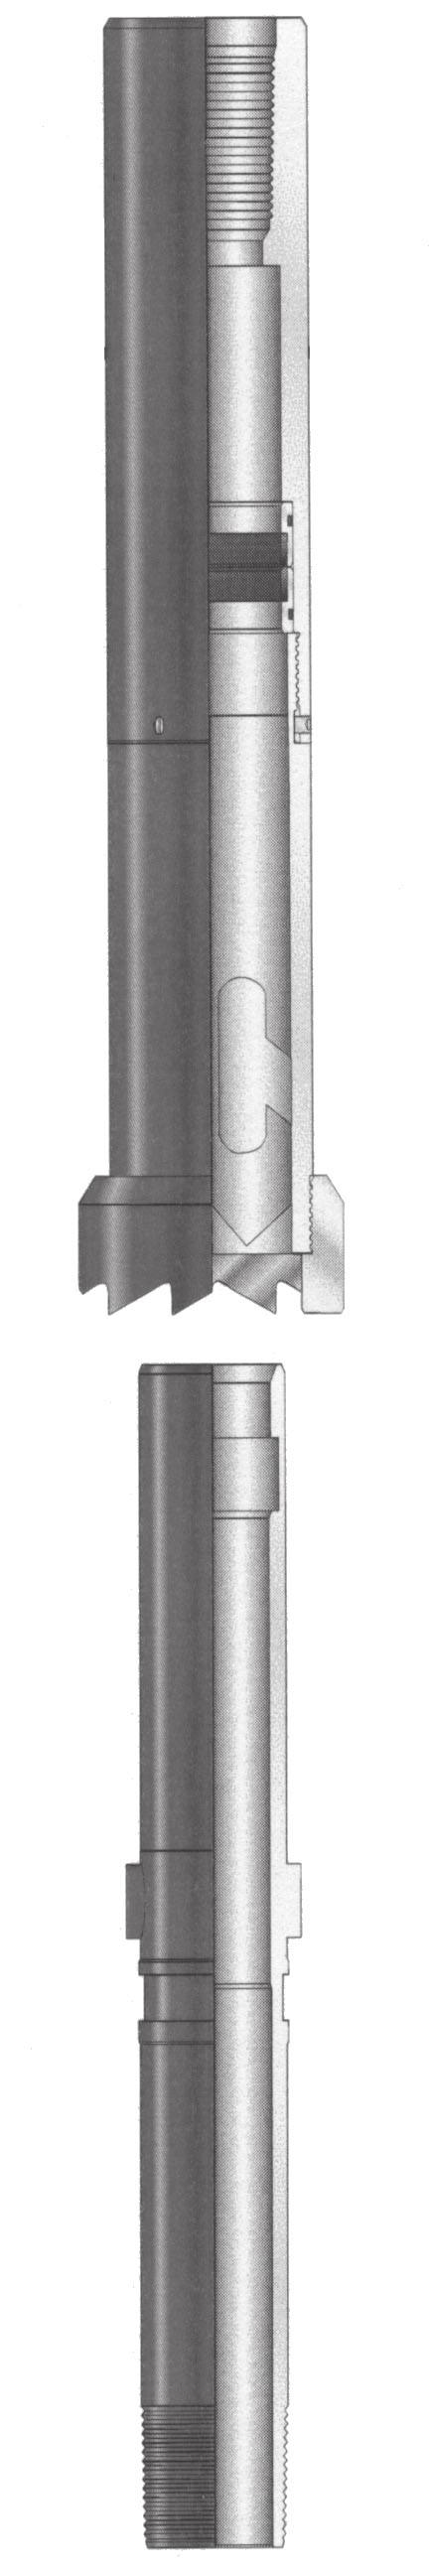 T-2 On-Off Tool Classic Oilfield s T-2 On-Off Tool enables the tubing string to be disconnected above a packer for zonal isolation, tubing retrieval, and temporary zone abandonment.